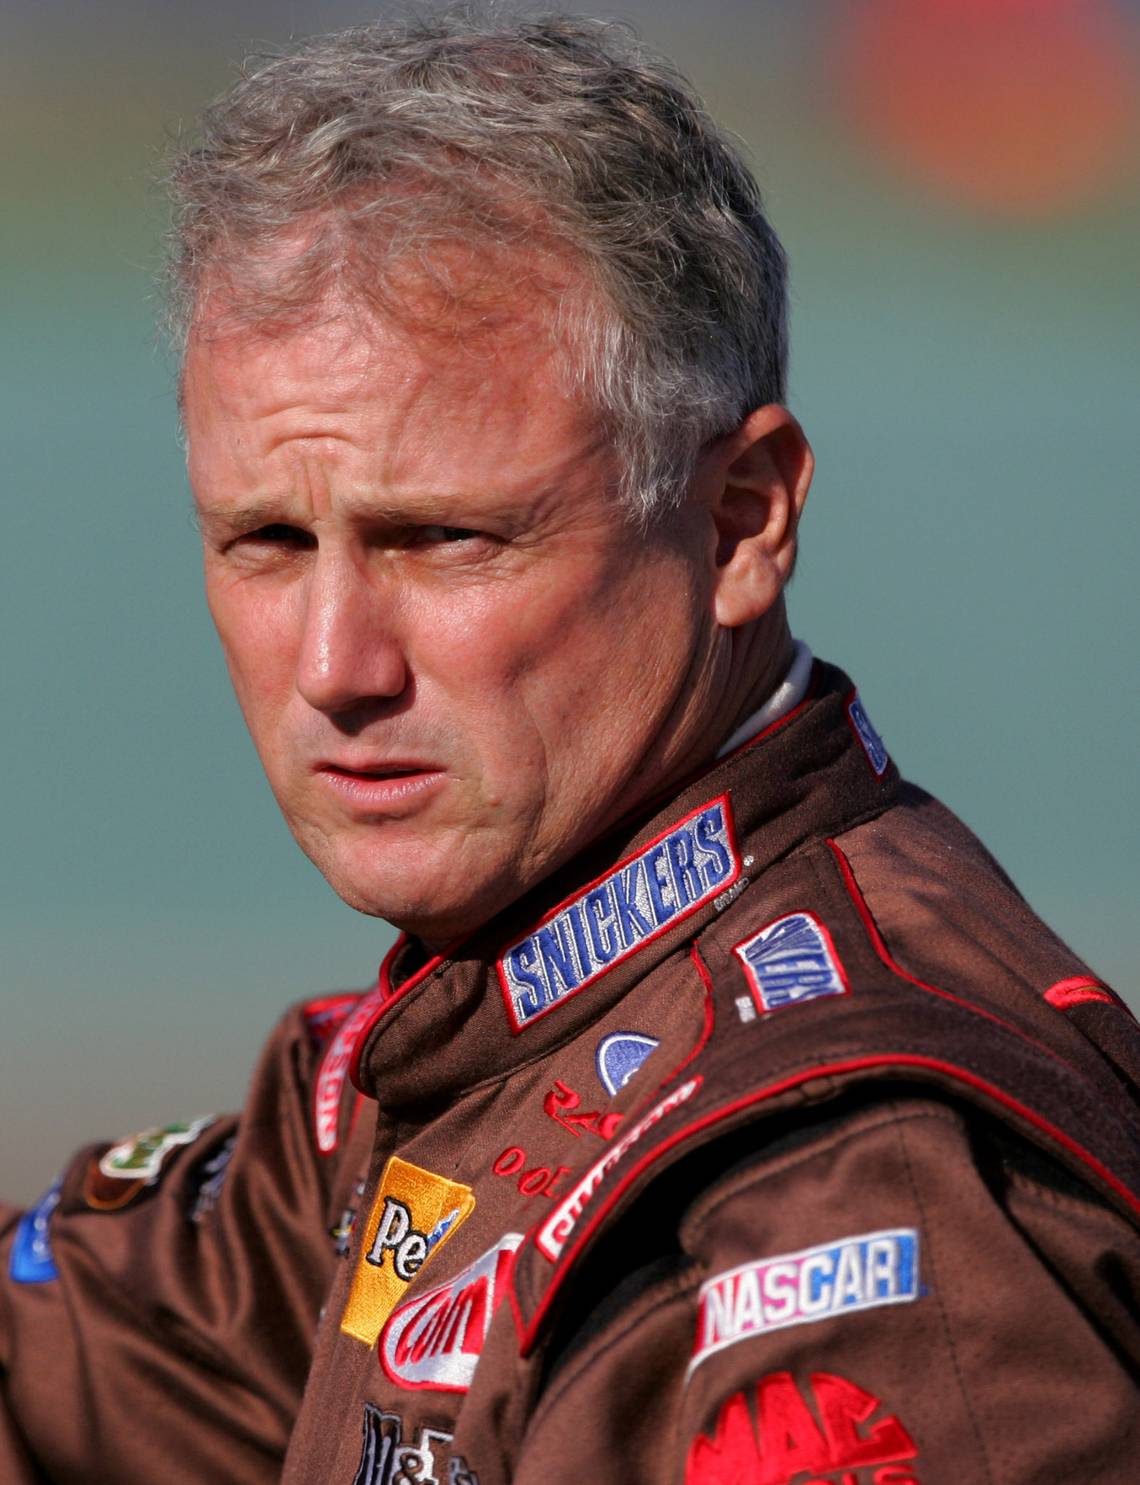 Ricky Rudd goes from doing yard work to hearing he’s made the NASCAR Hall of Fame